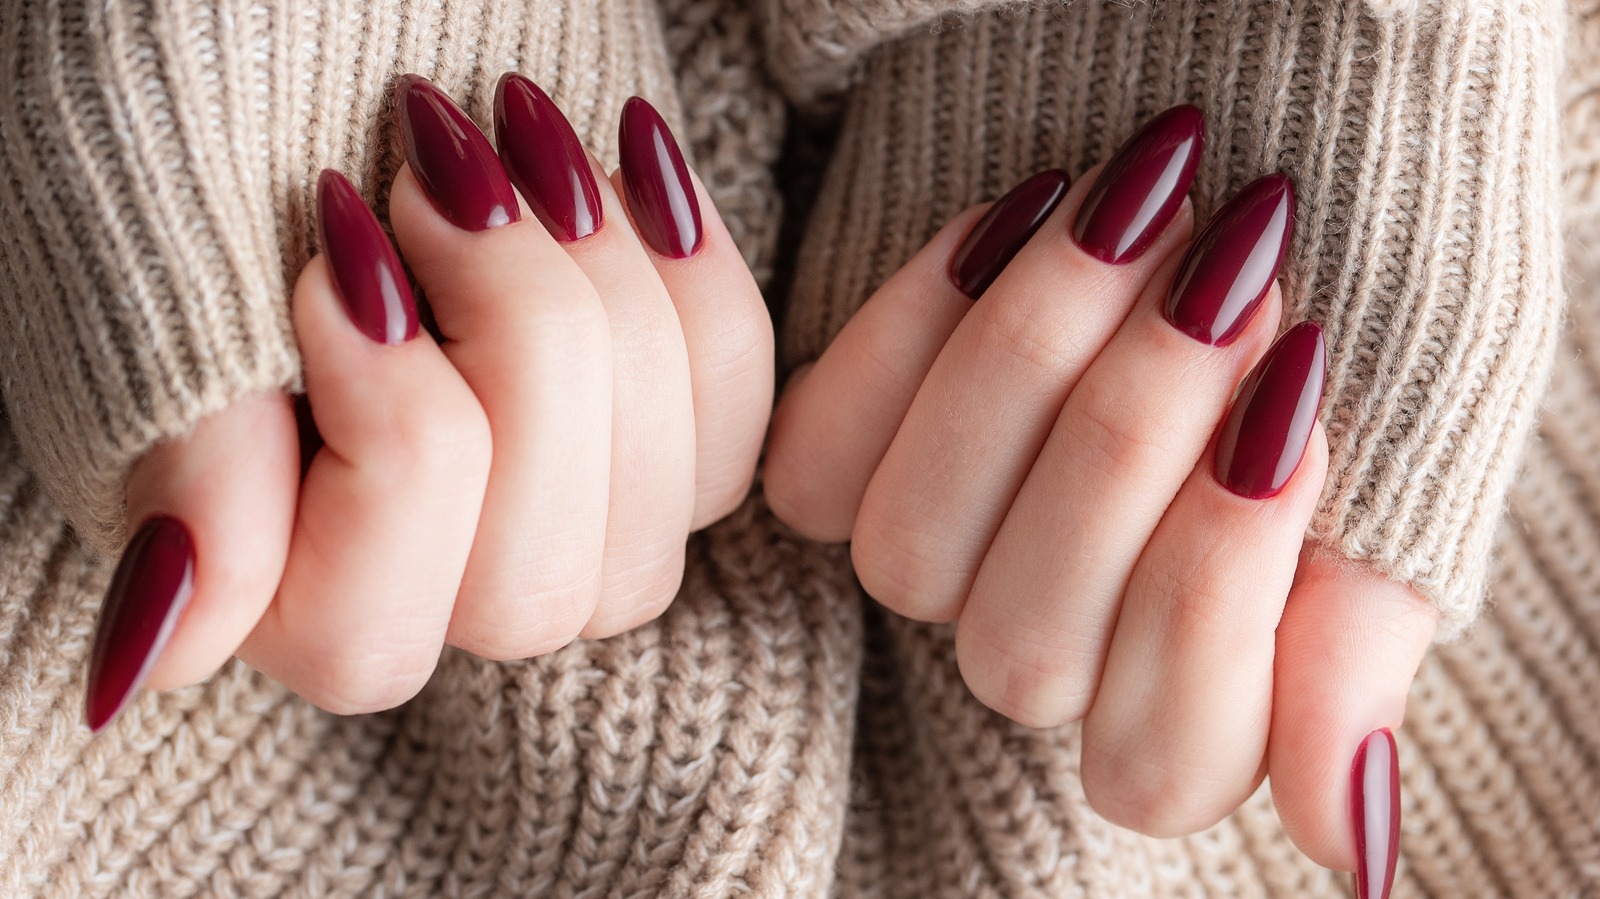 A Nail Expert Details Best Prep Work Practices To Make Your Manicure Go The  Distance